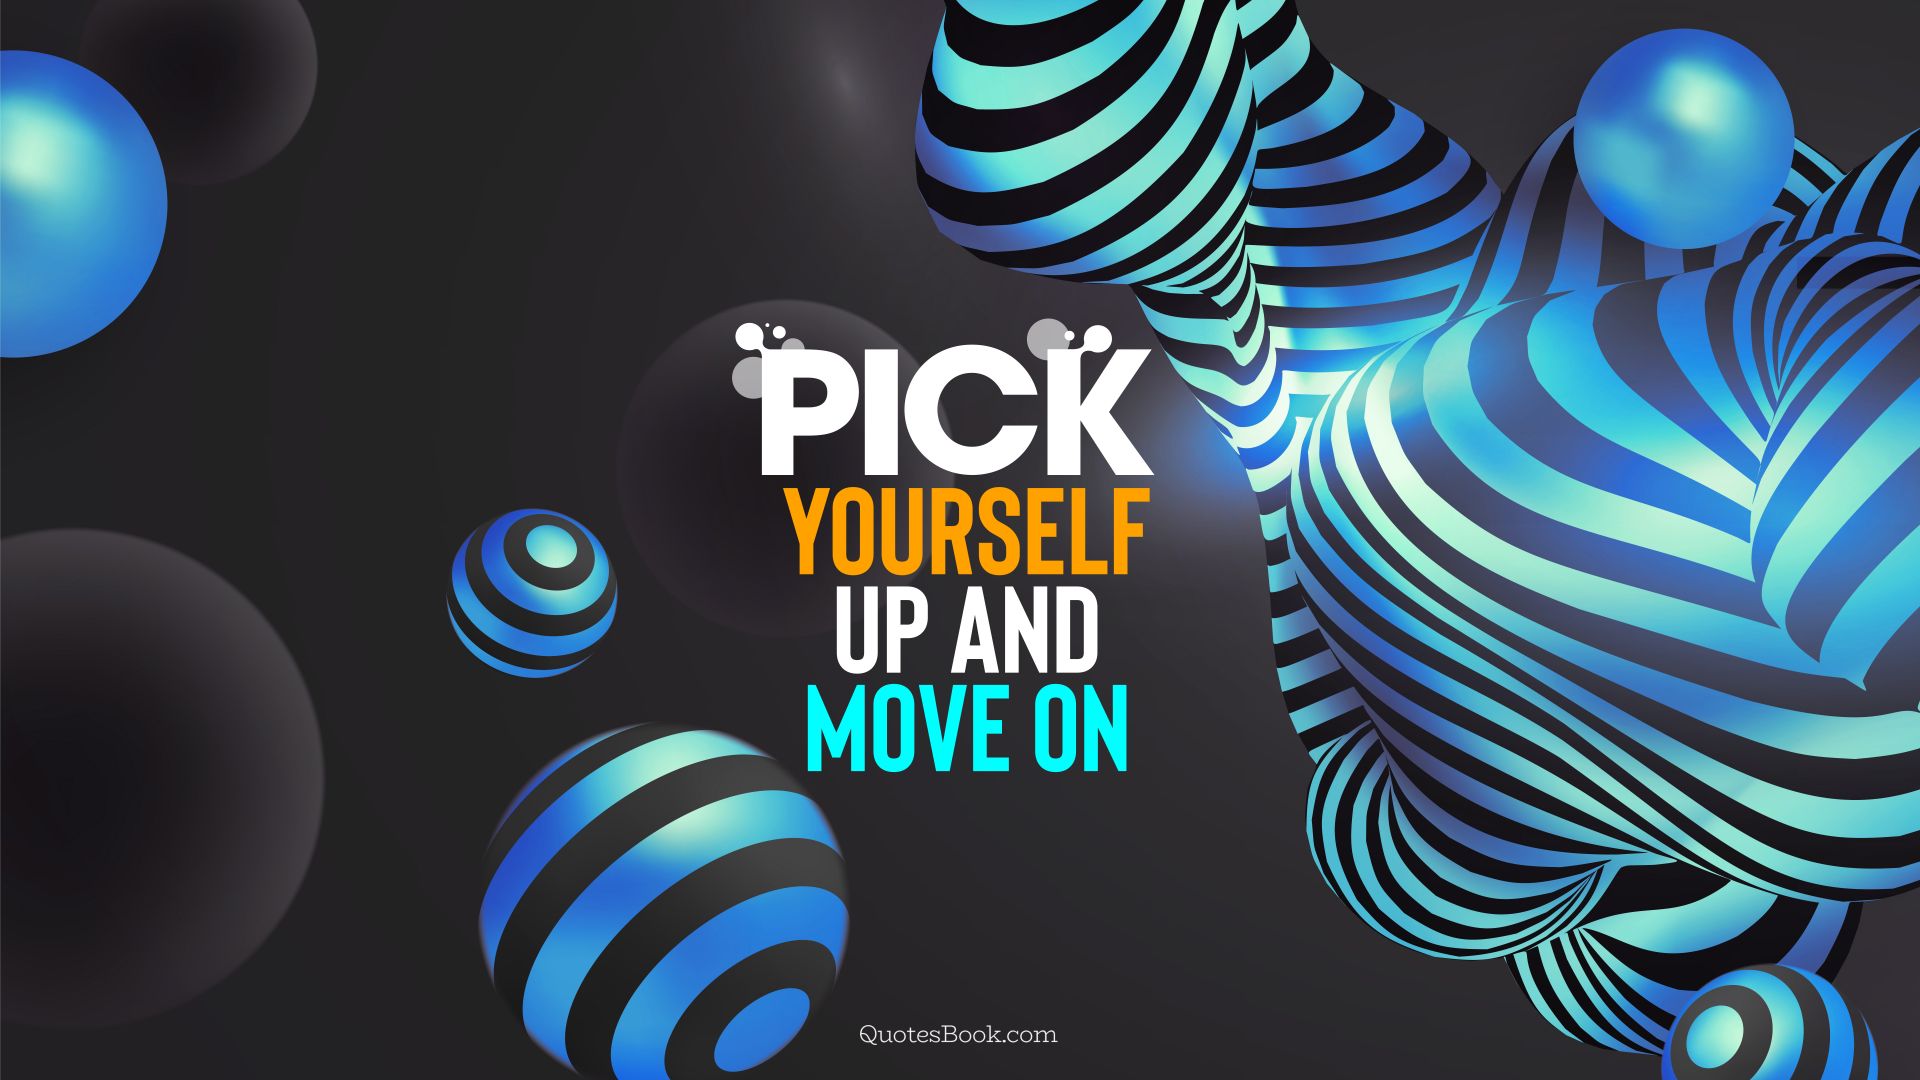 Pick yourself up and move on. - Quote by QuotesBook